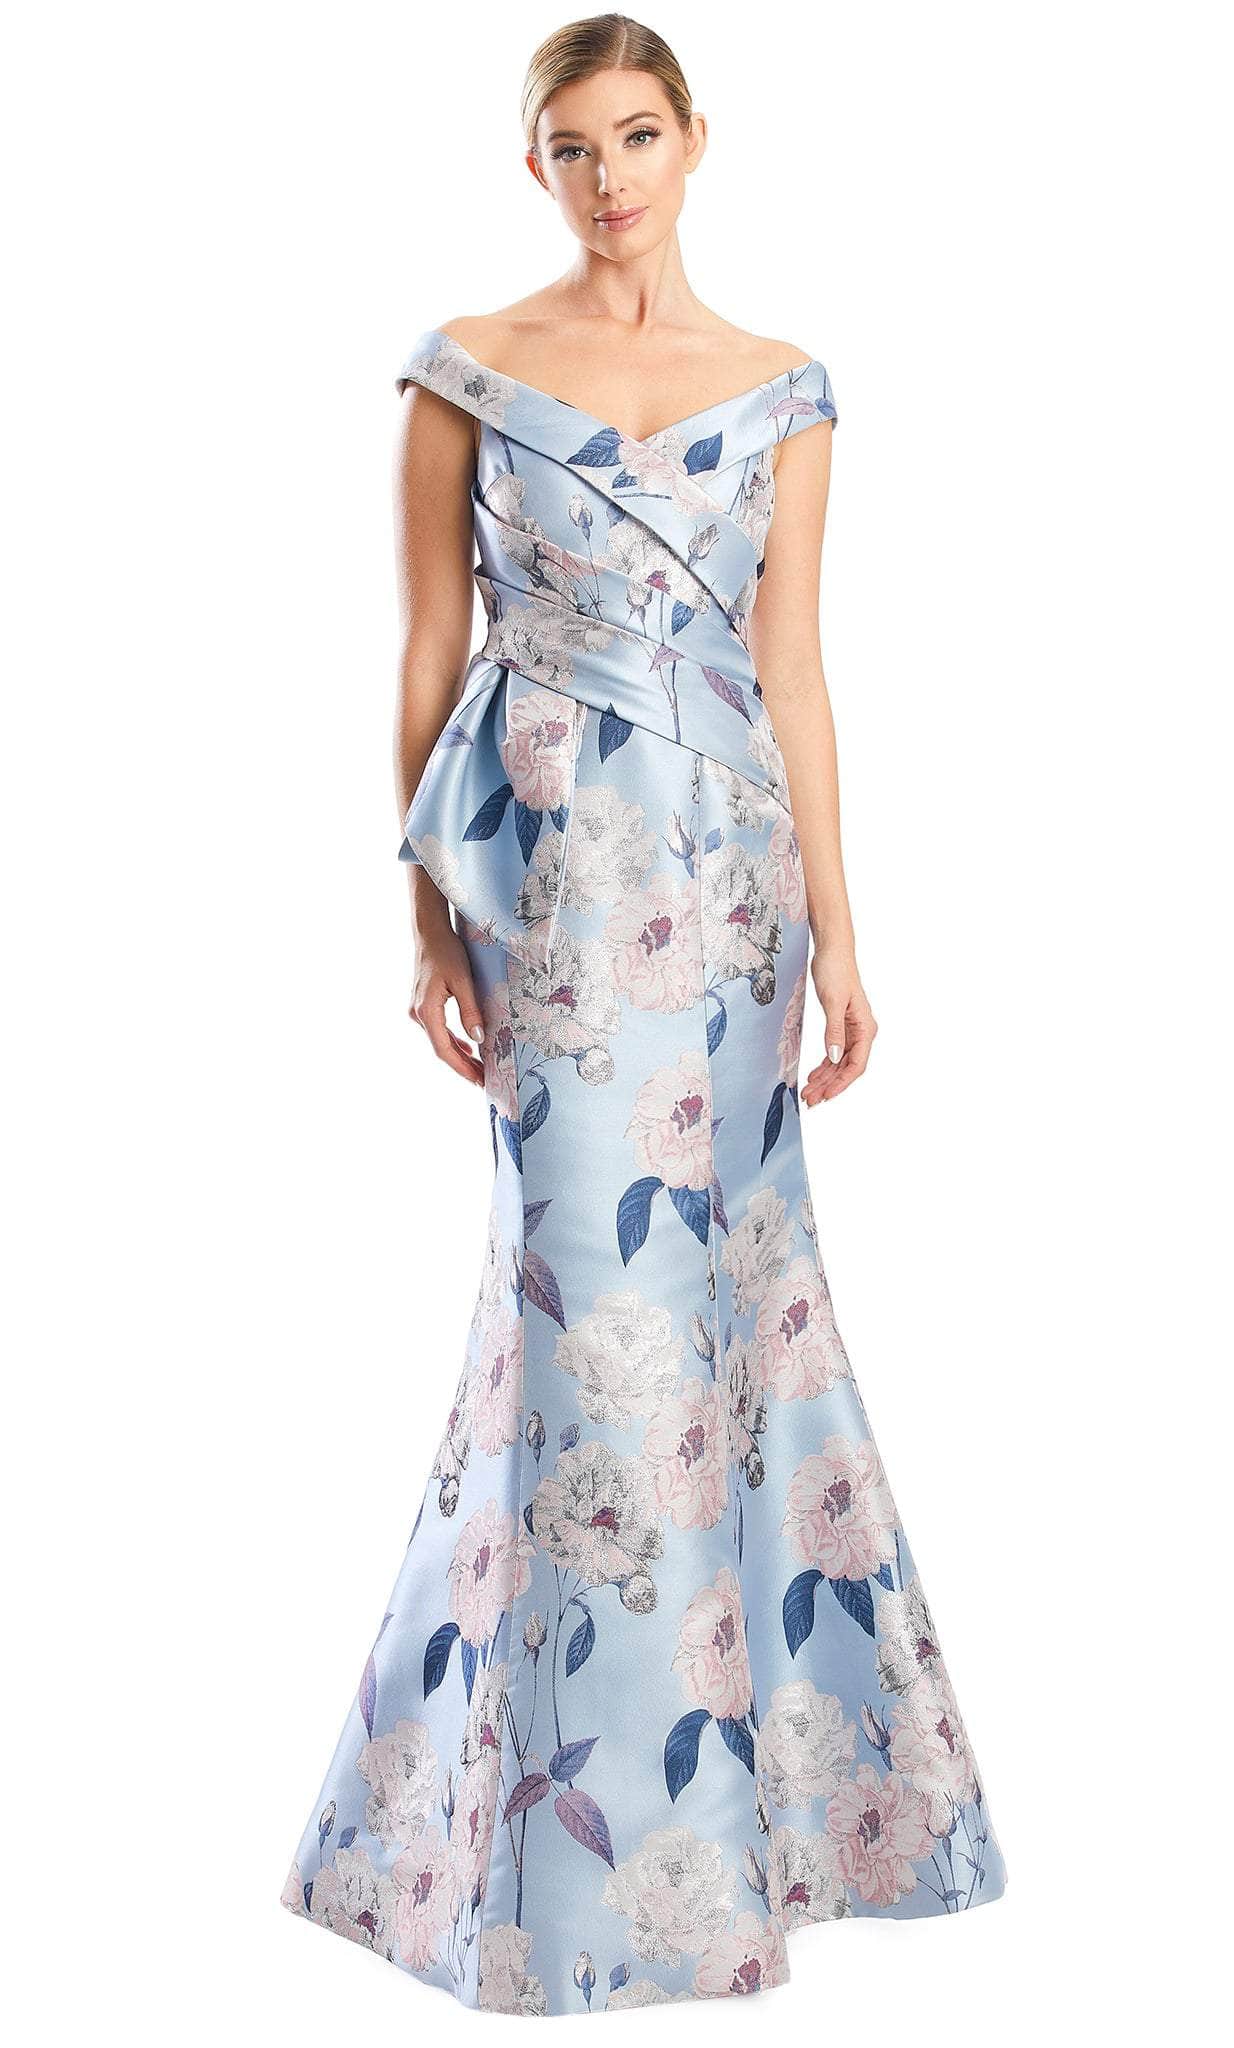 Alexander by Daymor 1767S23 - Floral Printed Evening Gown Evening Dresses 00 / Cielo/Multi